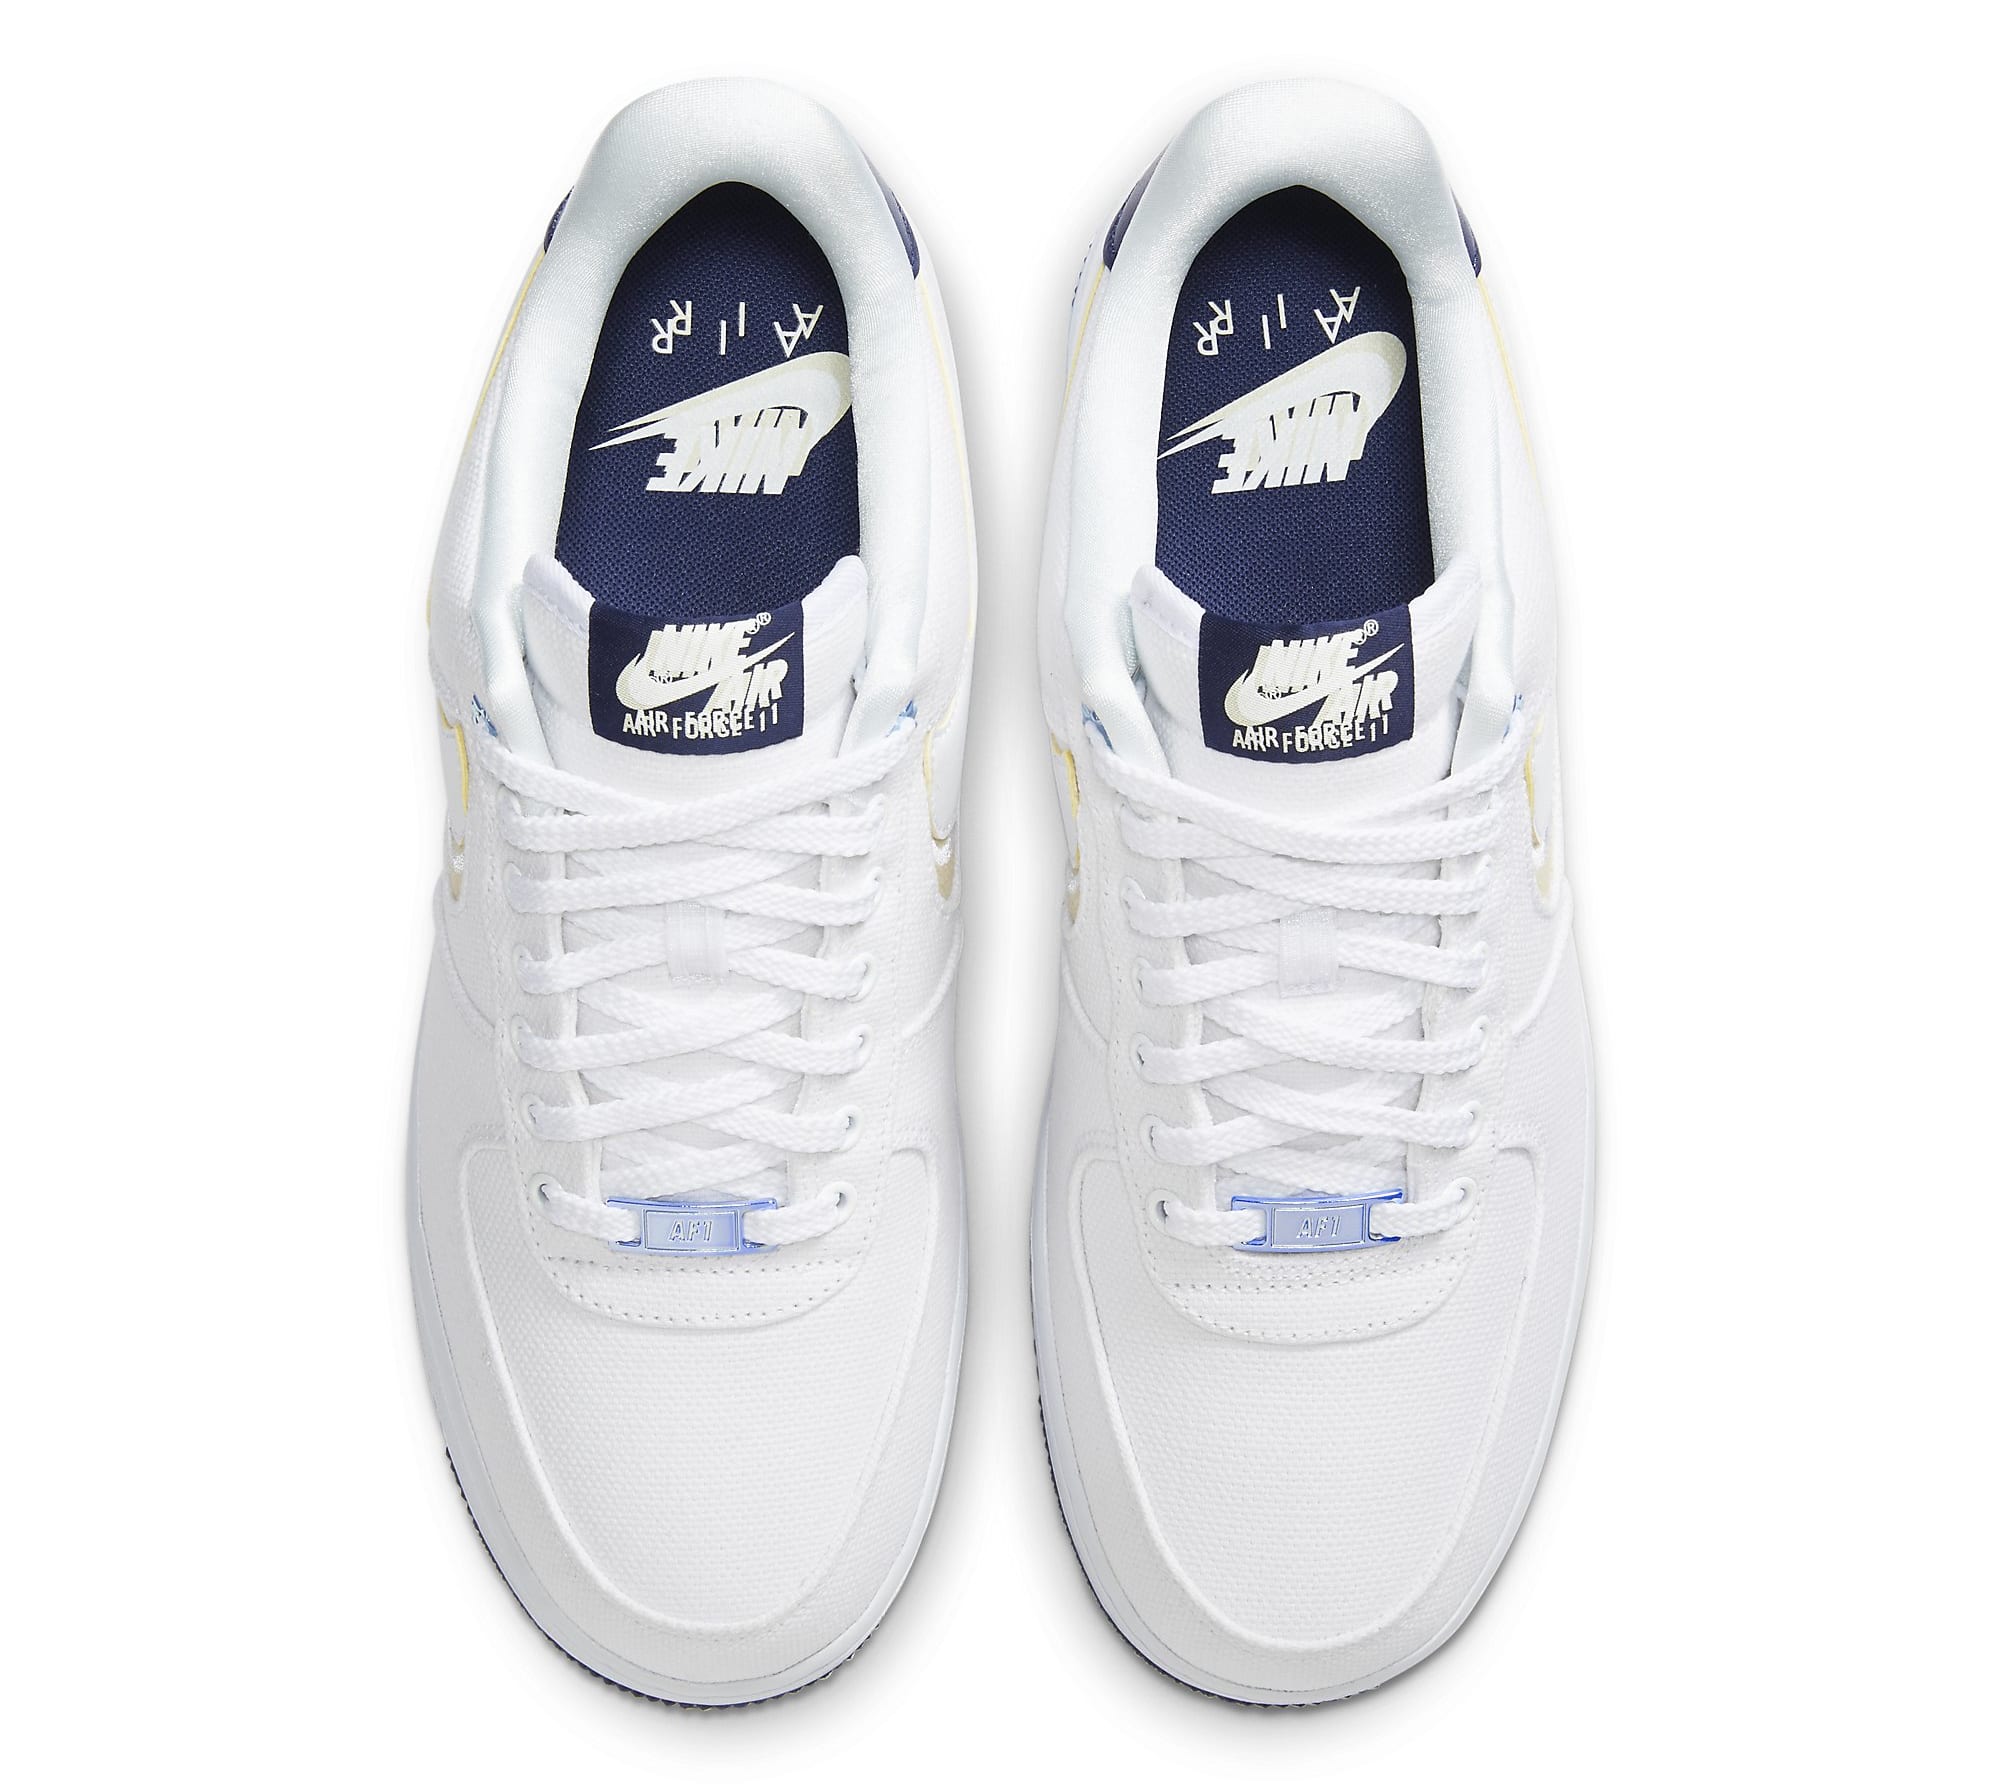 Nike Moment 37 Street Fighter Air Force 1 Top